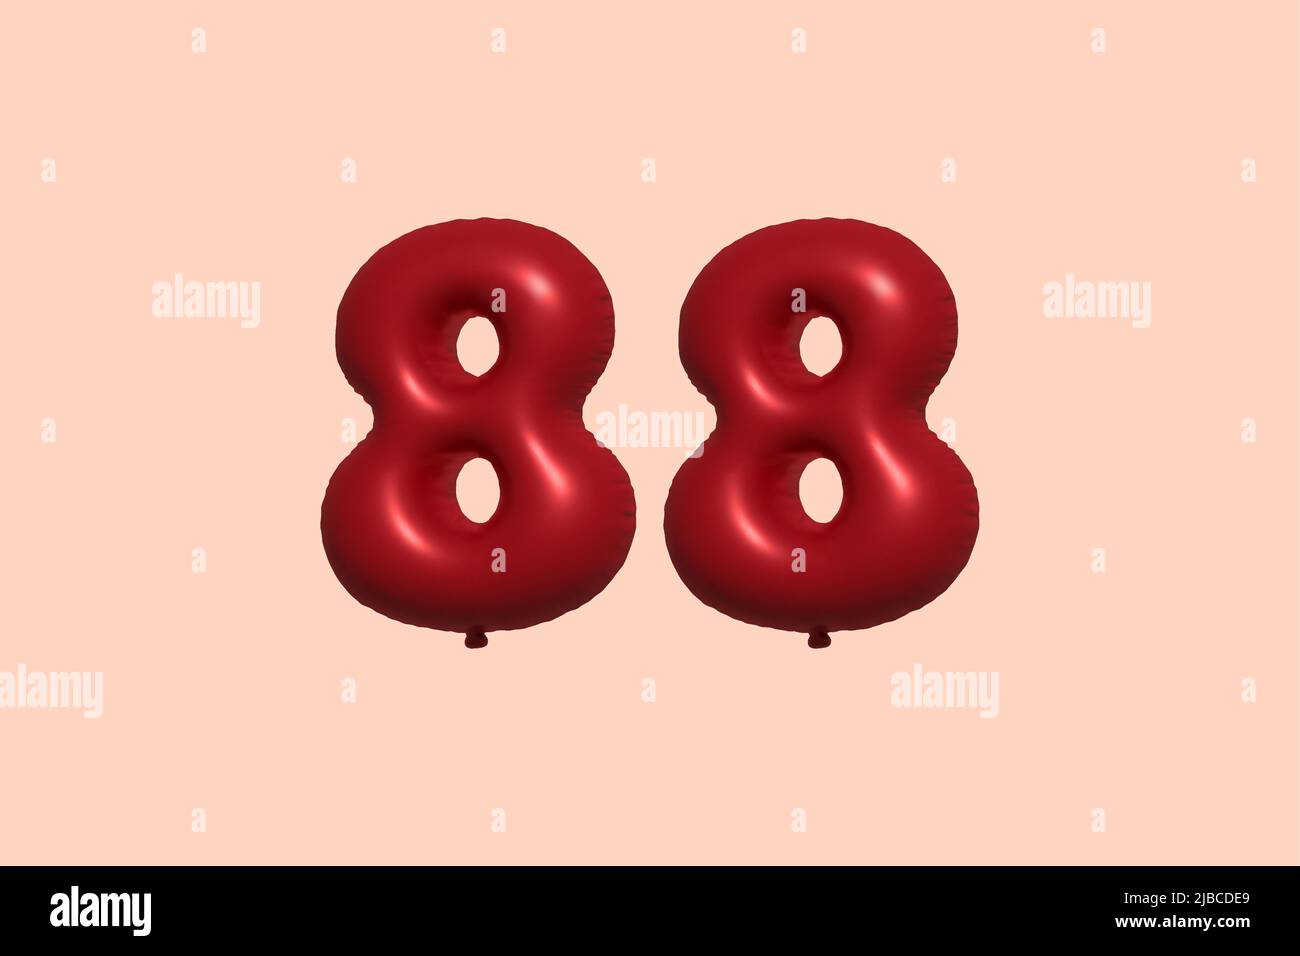 88 number Stock Vector Images - Alamy